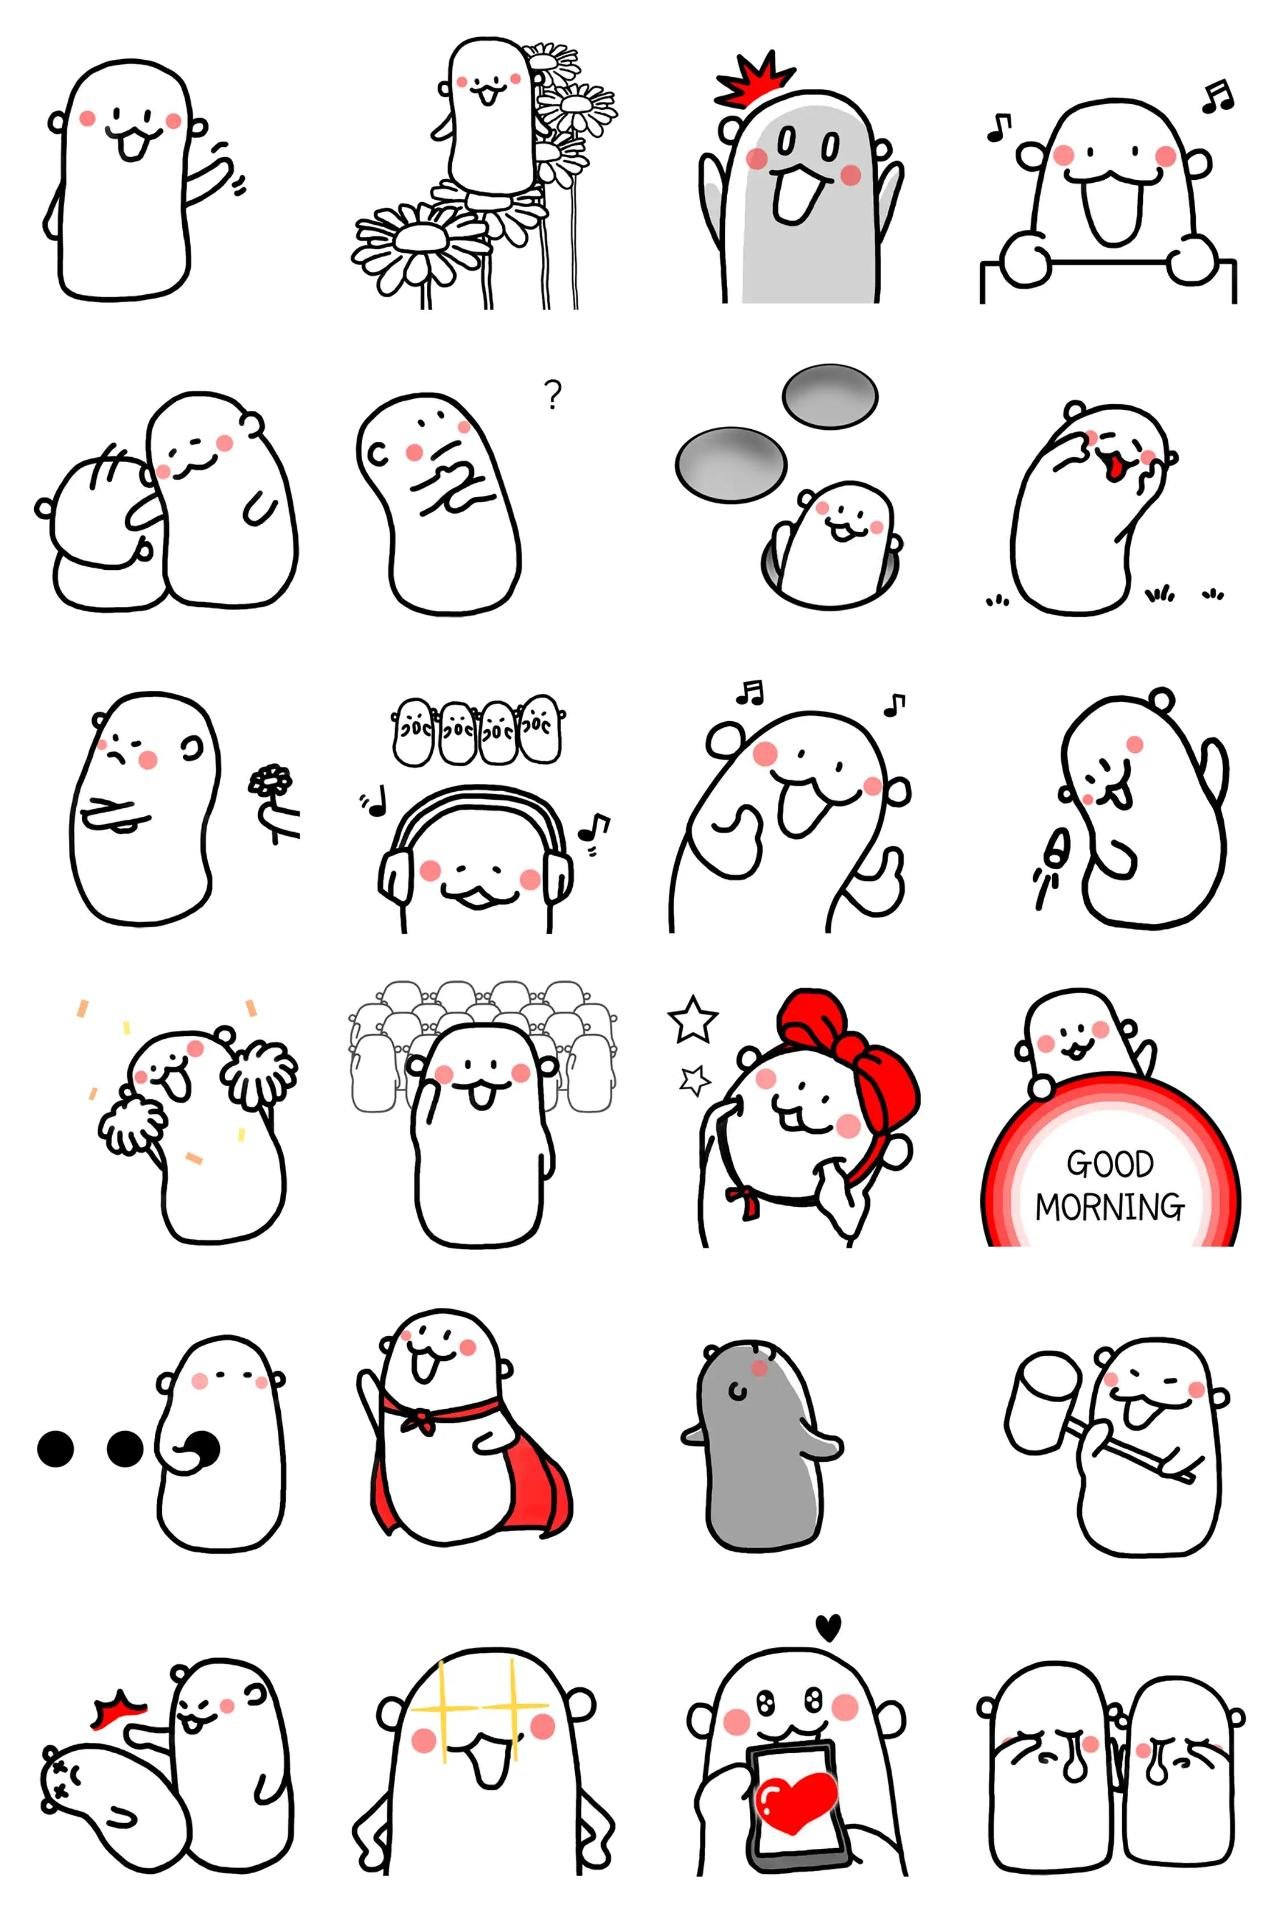 Woing Animation/Cartoon sticker pack for Whatsapp, Telegram, Signal, and others chatting and message apps